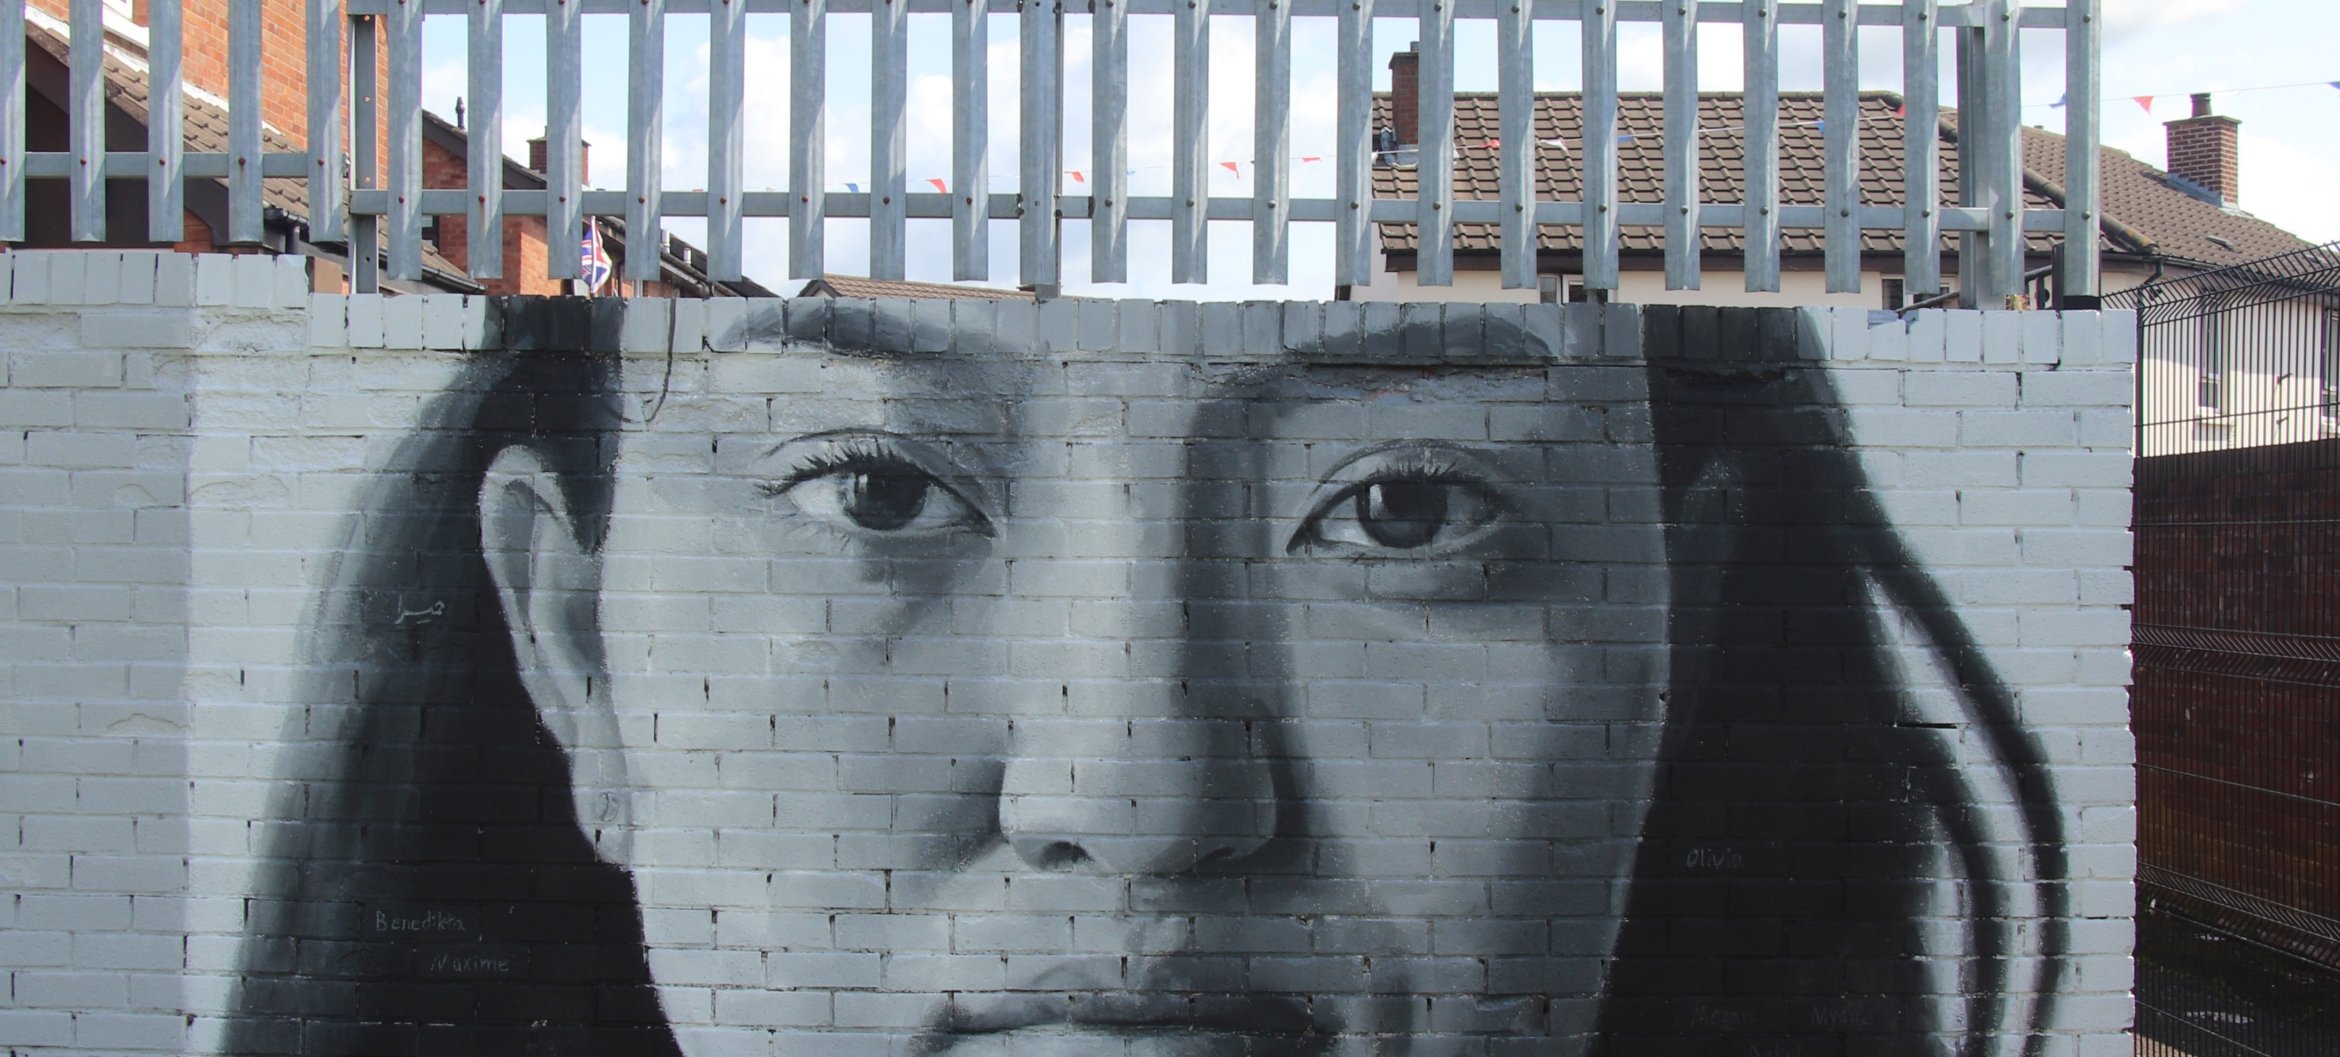 ‘We Are Here’, a mural on the &#039;Peace Wall&#039; in Belfast, by iMAE-alumnus Leyli Rashidirauf and people of the local community. The preace wall runs along the Shankill Mission. Photo by Brian Kelly